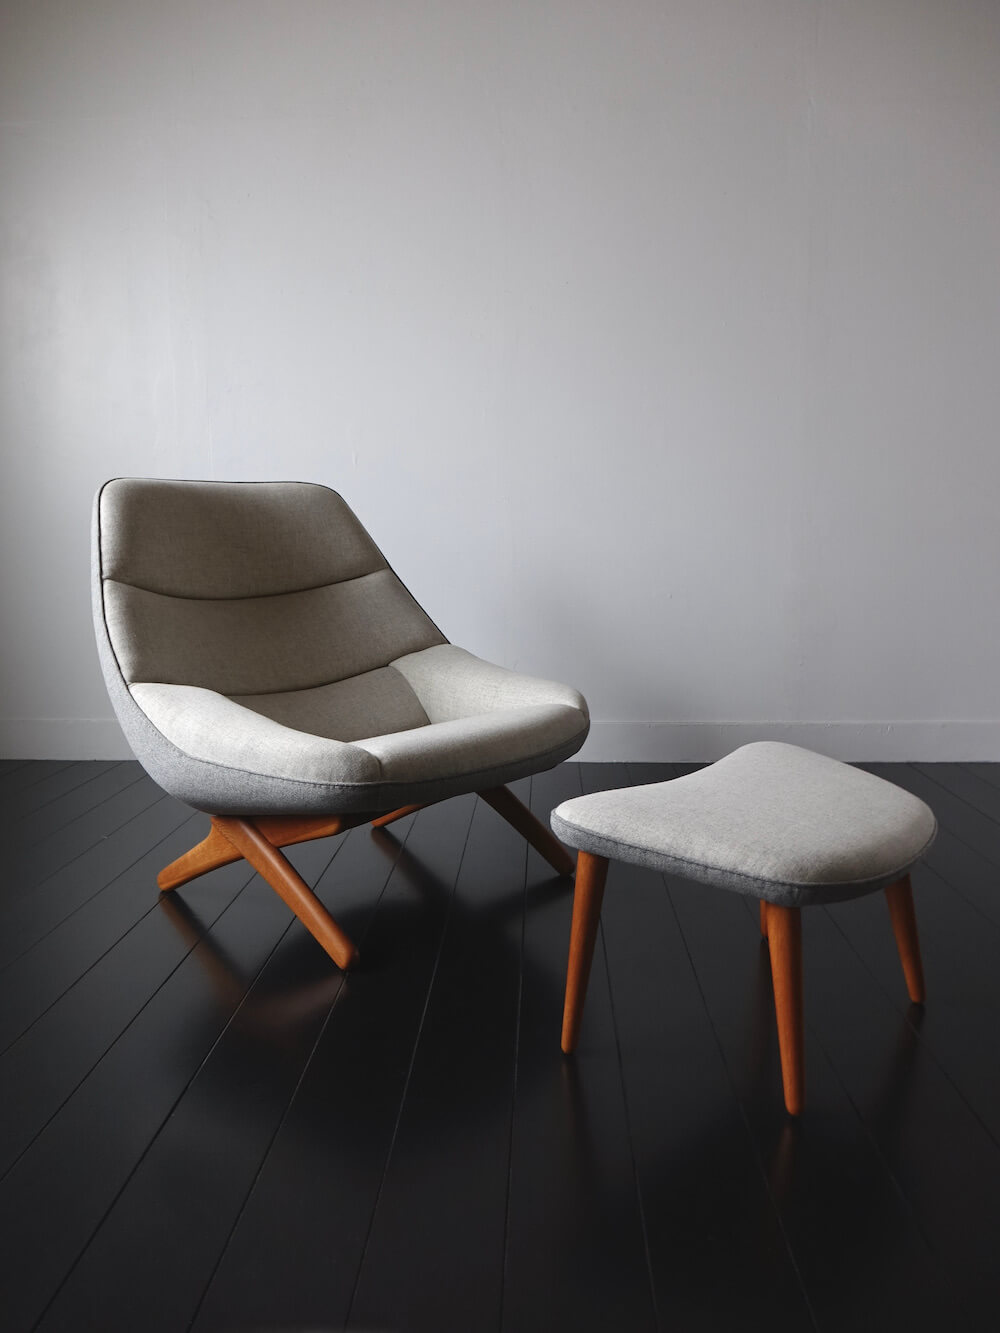 ML-91 Lounge chair with ottoman by Illum Wikkelso for A. Mikael Laursen